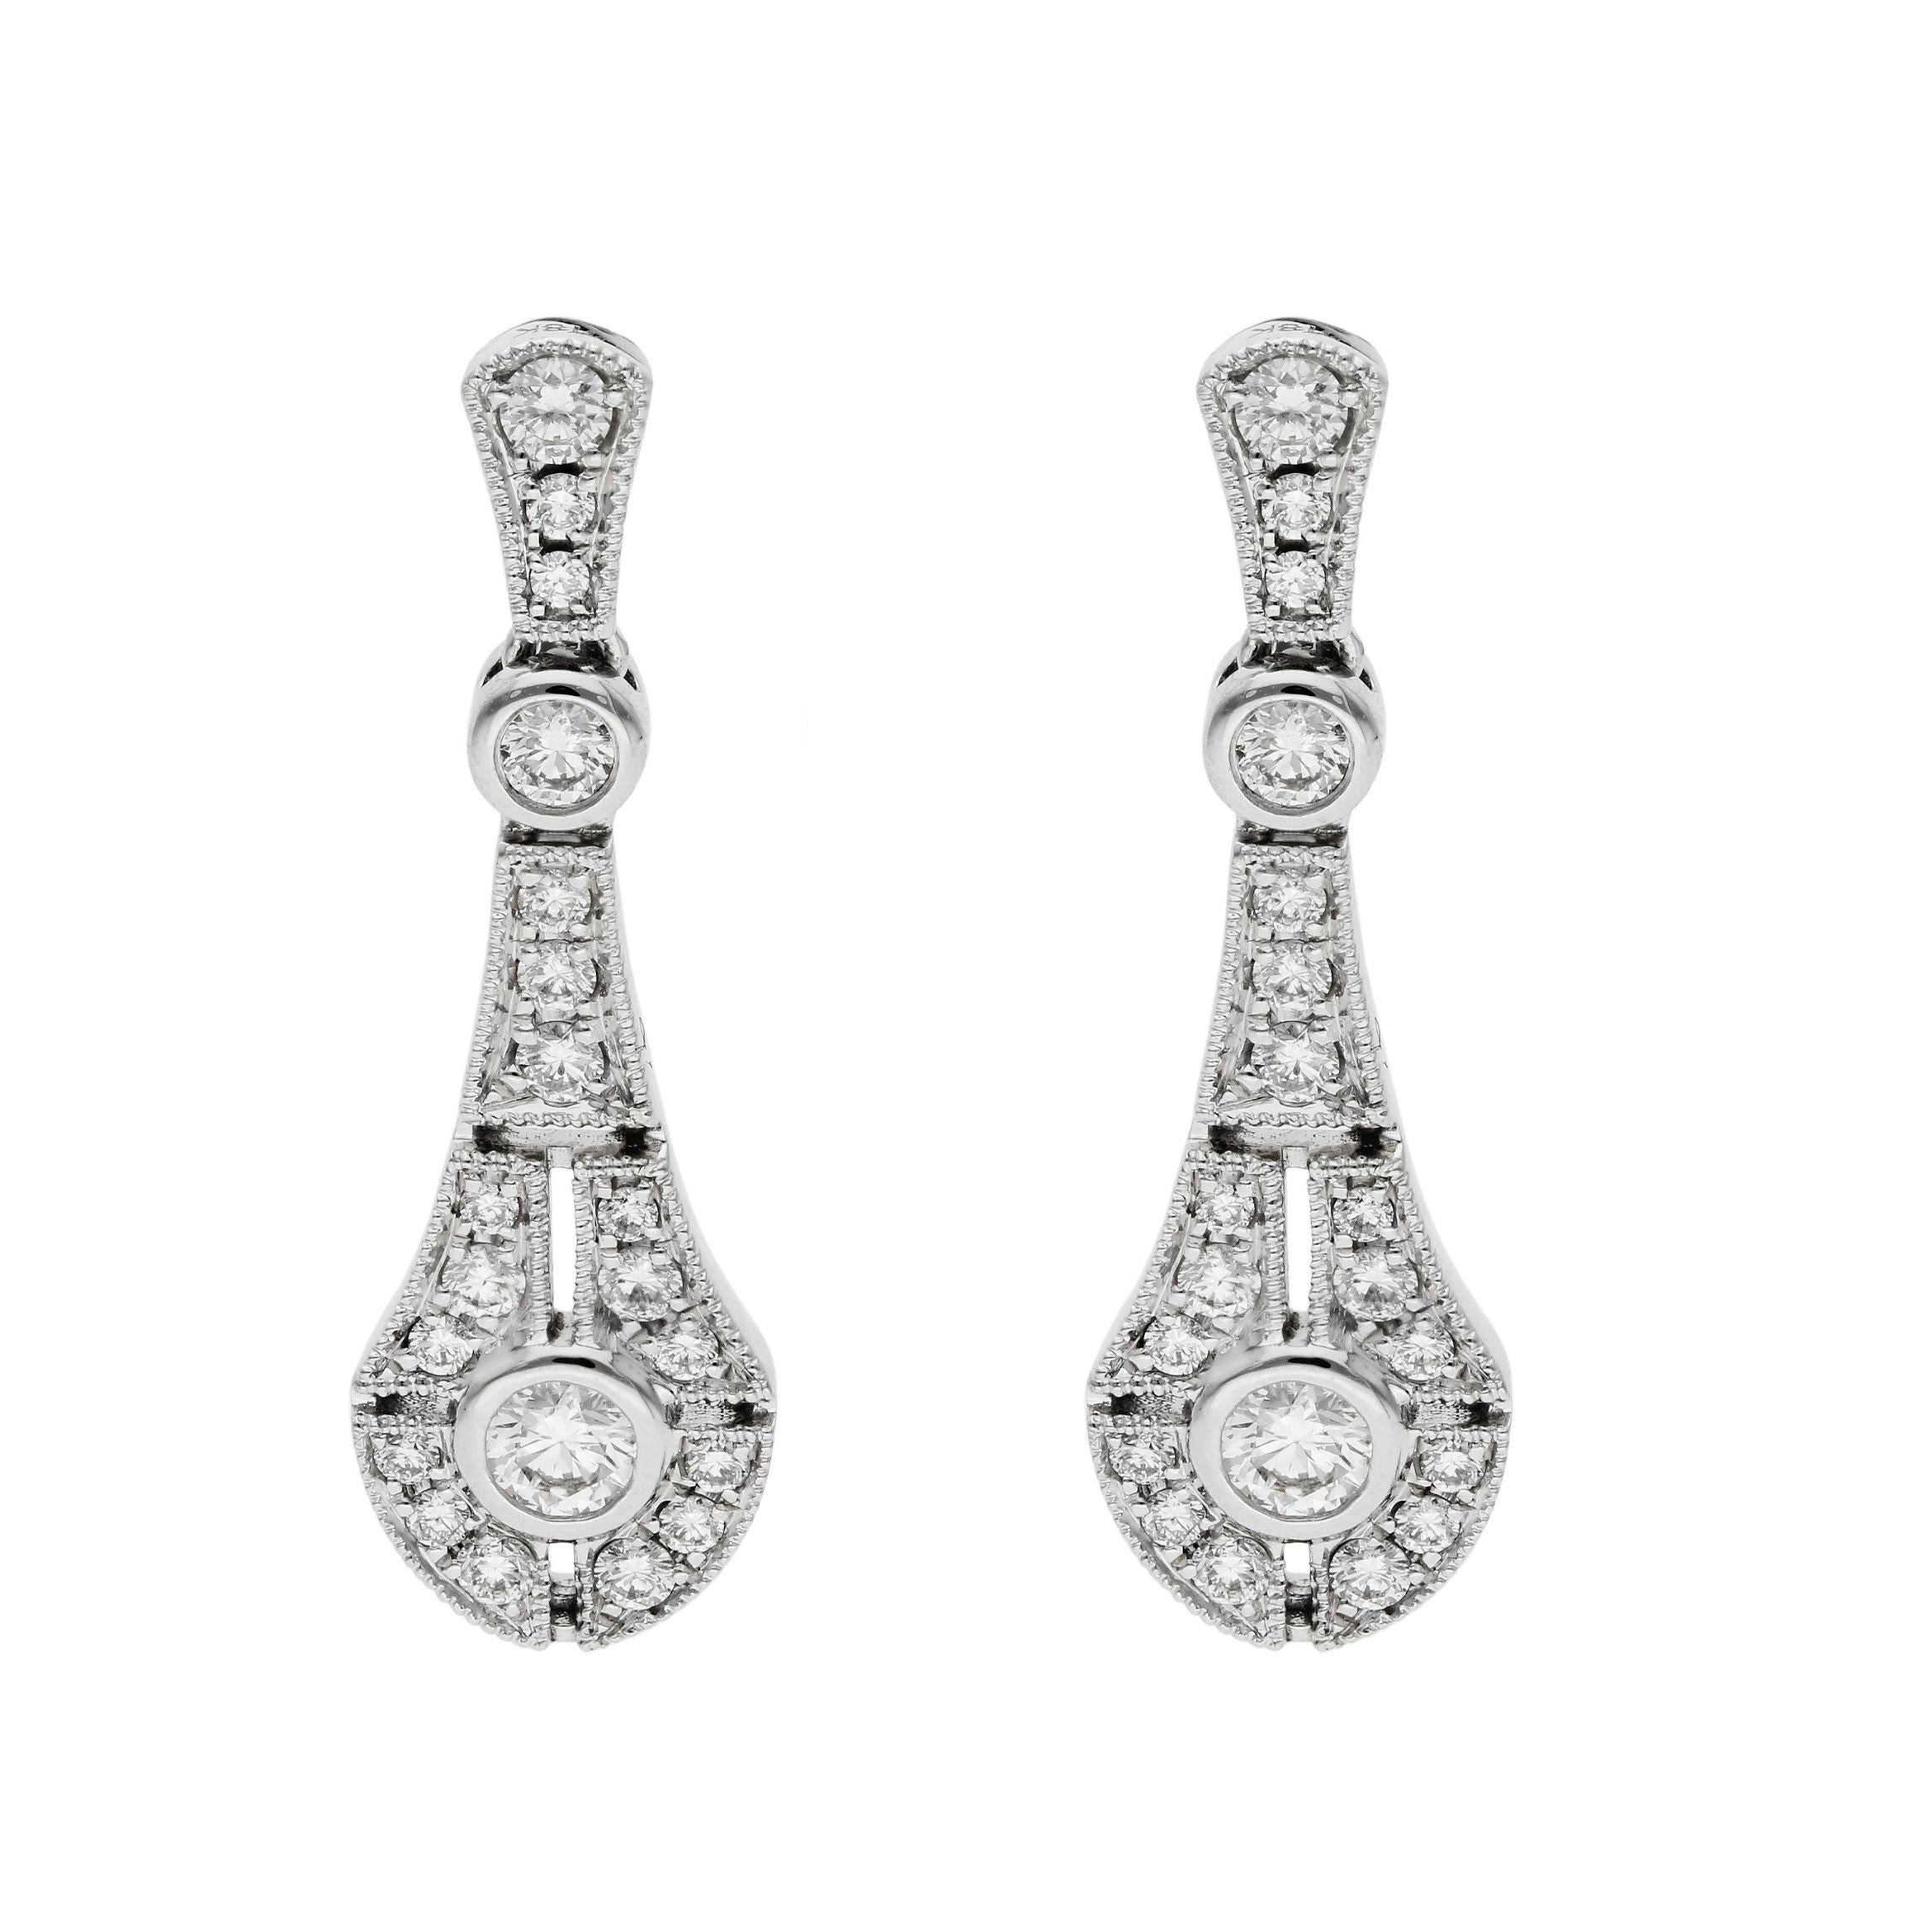 These majestic, ladies drop earrings are inspired by the roaring 1920's. An amazing and opulent pair of diamond drop earrings. The perfect gift for a diamond anniversary, April birthday or just because.

Each designed as a pear drop, diamond